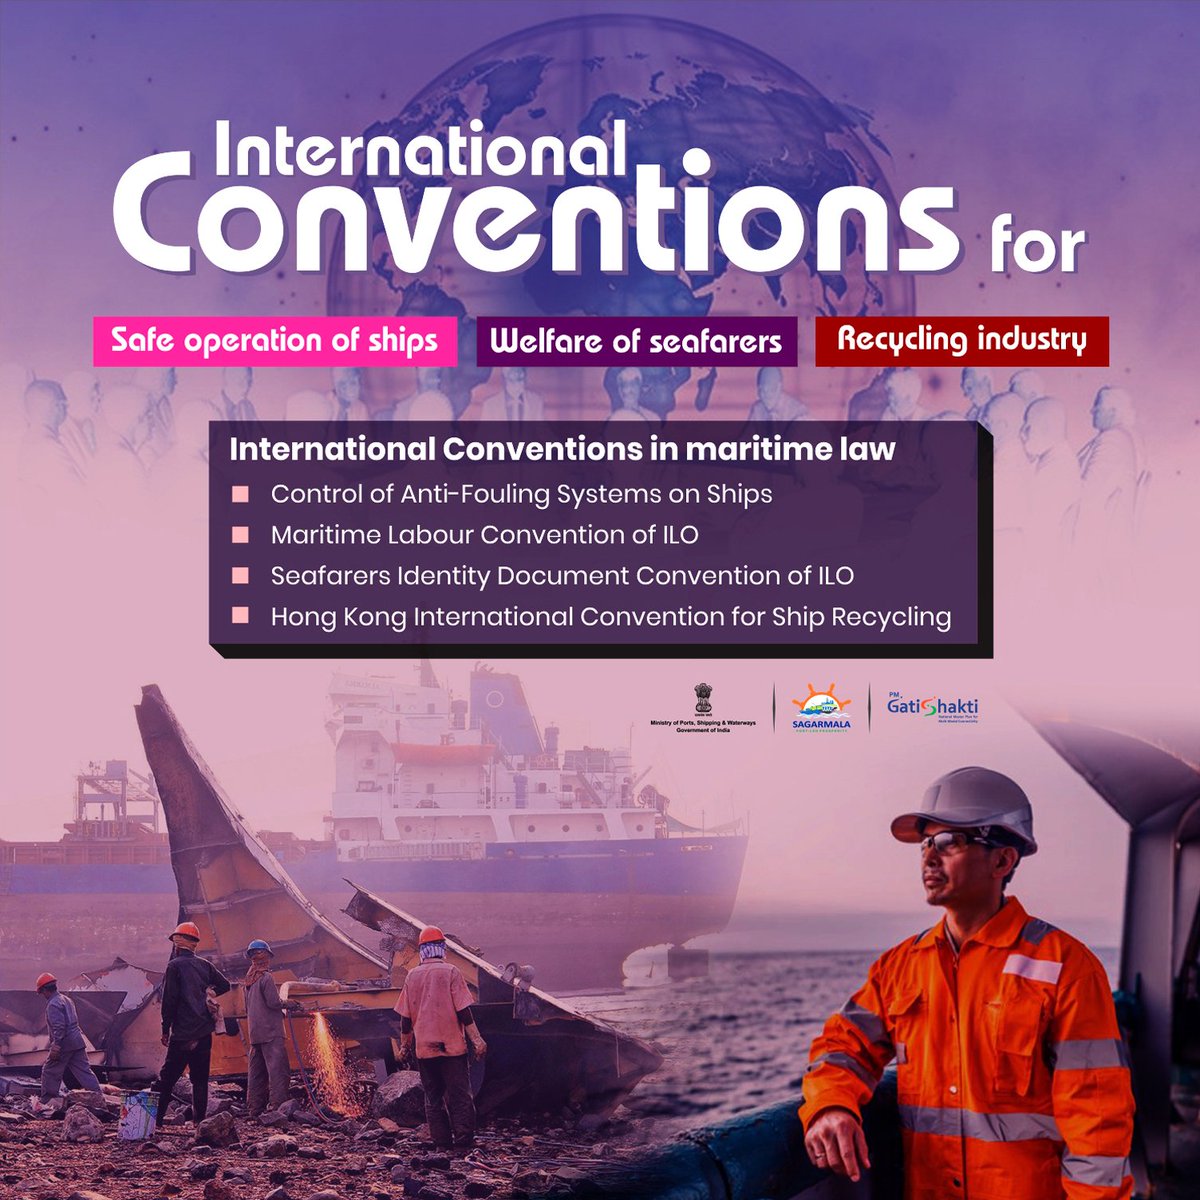 India is a party to many International Conventions in maritime law for safe operation of ships, welfare of seafarers, International Convention on Control of Anti-Fouling Systems on Ships and Hong Kong International Convention for Safe & Environmentally Sound Recycling of Ships.